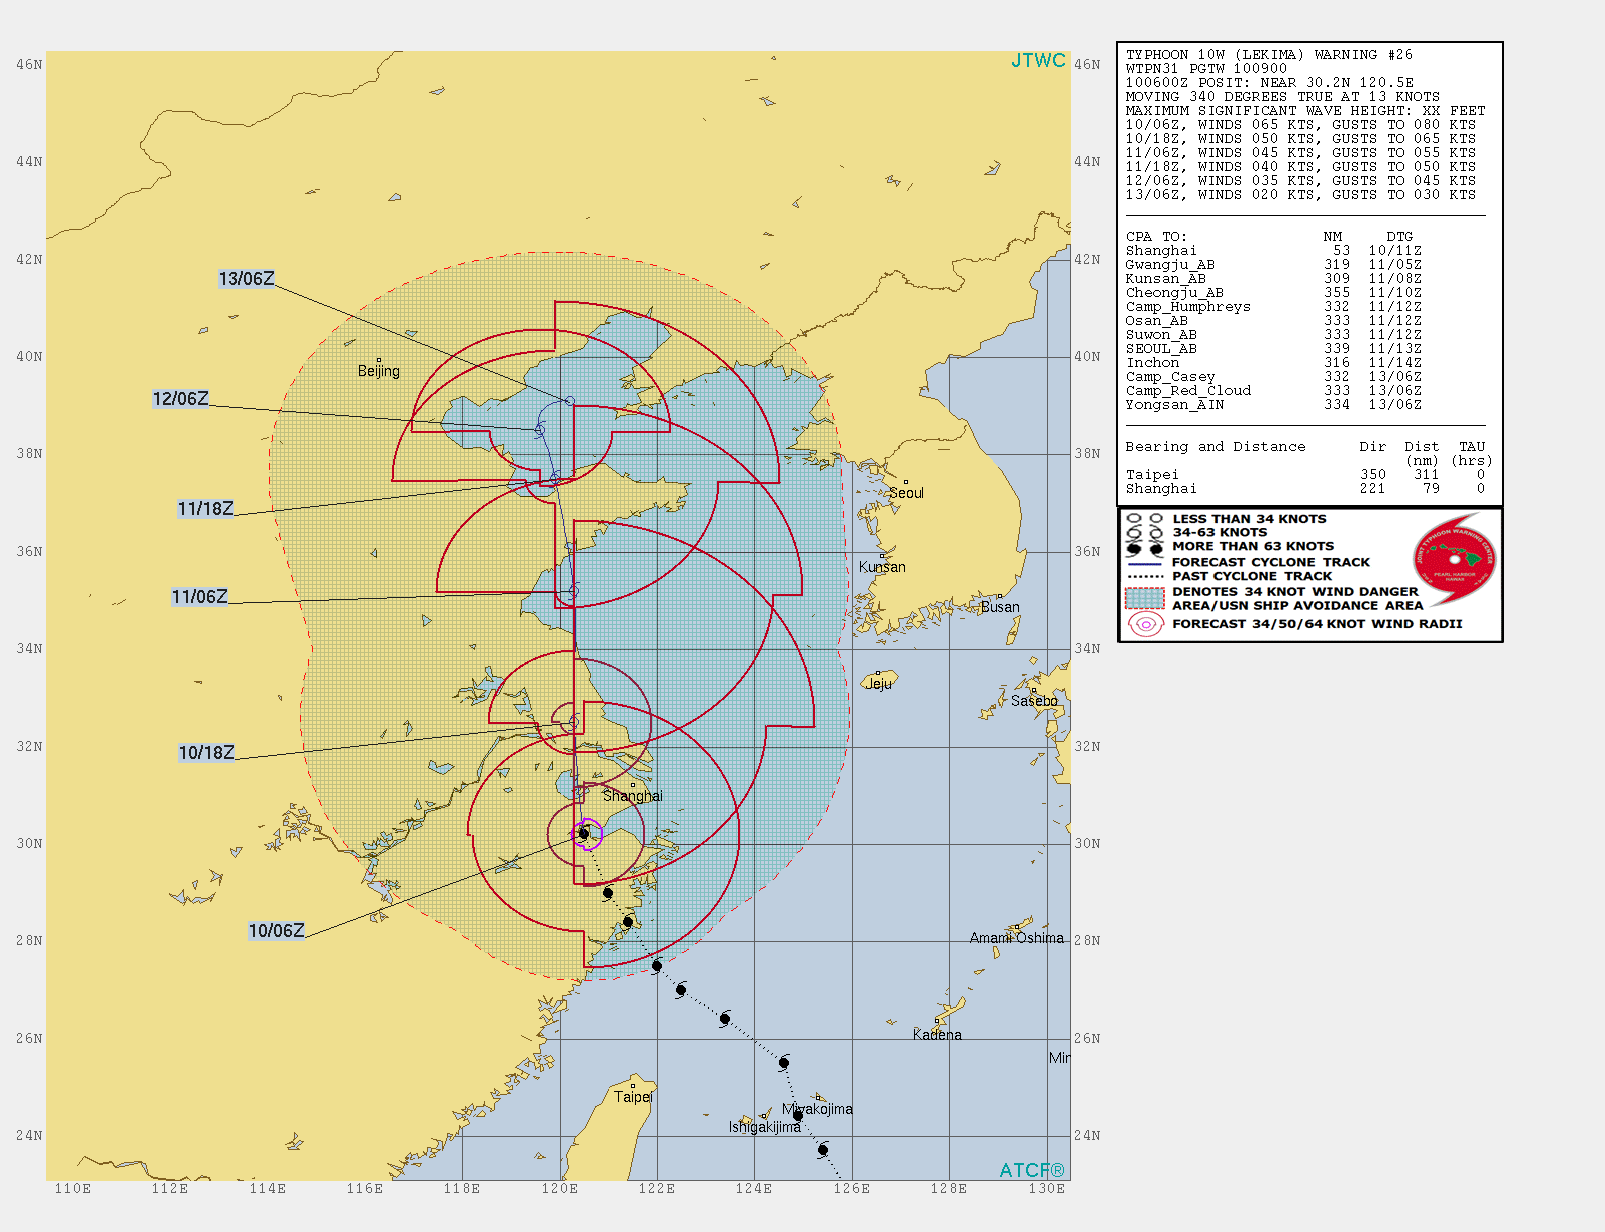 LEKIMA tracking west of Shanghai with strong winds but weakening. Krosa: update